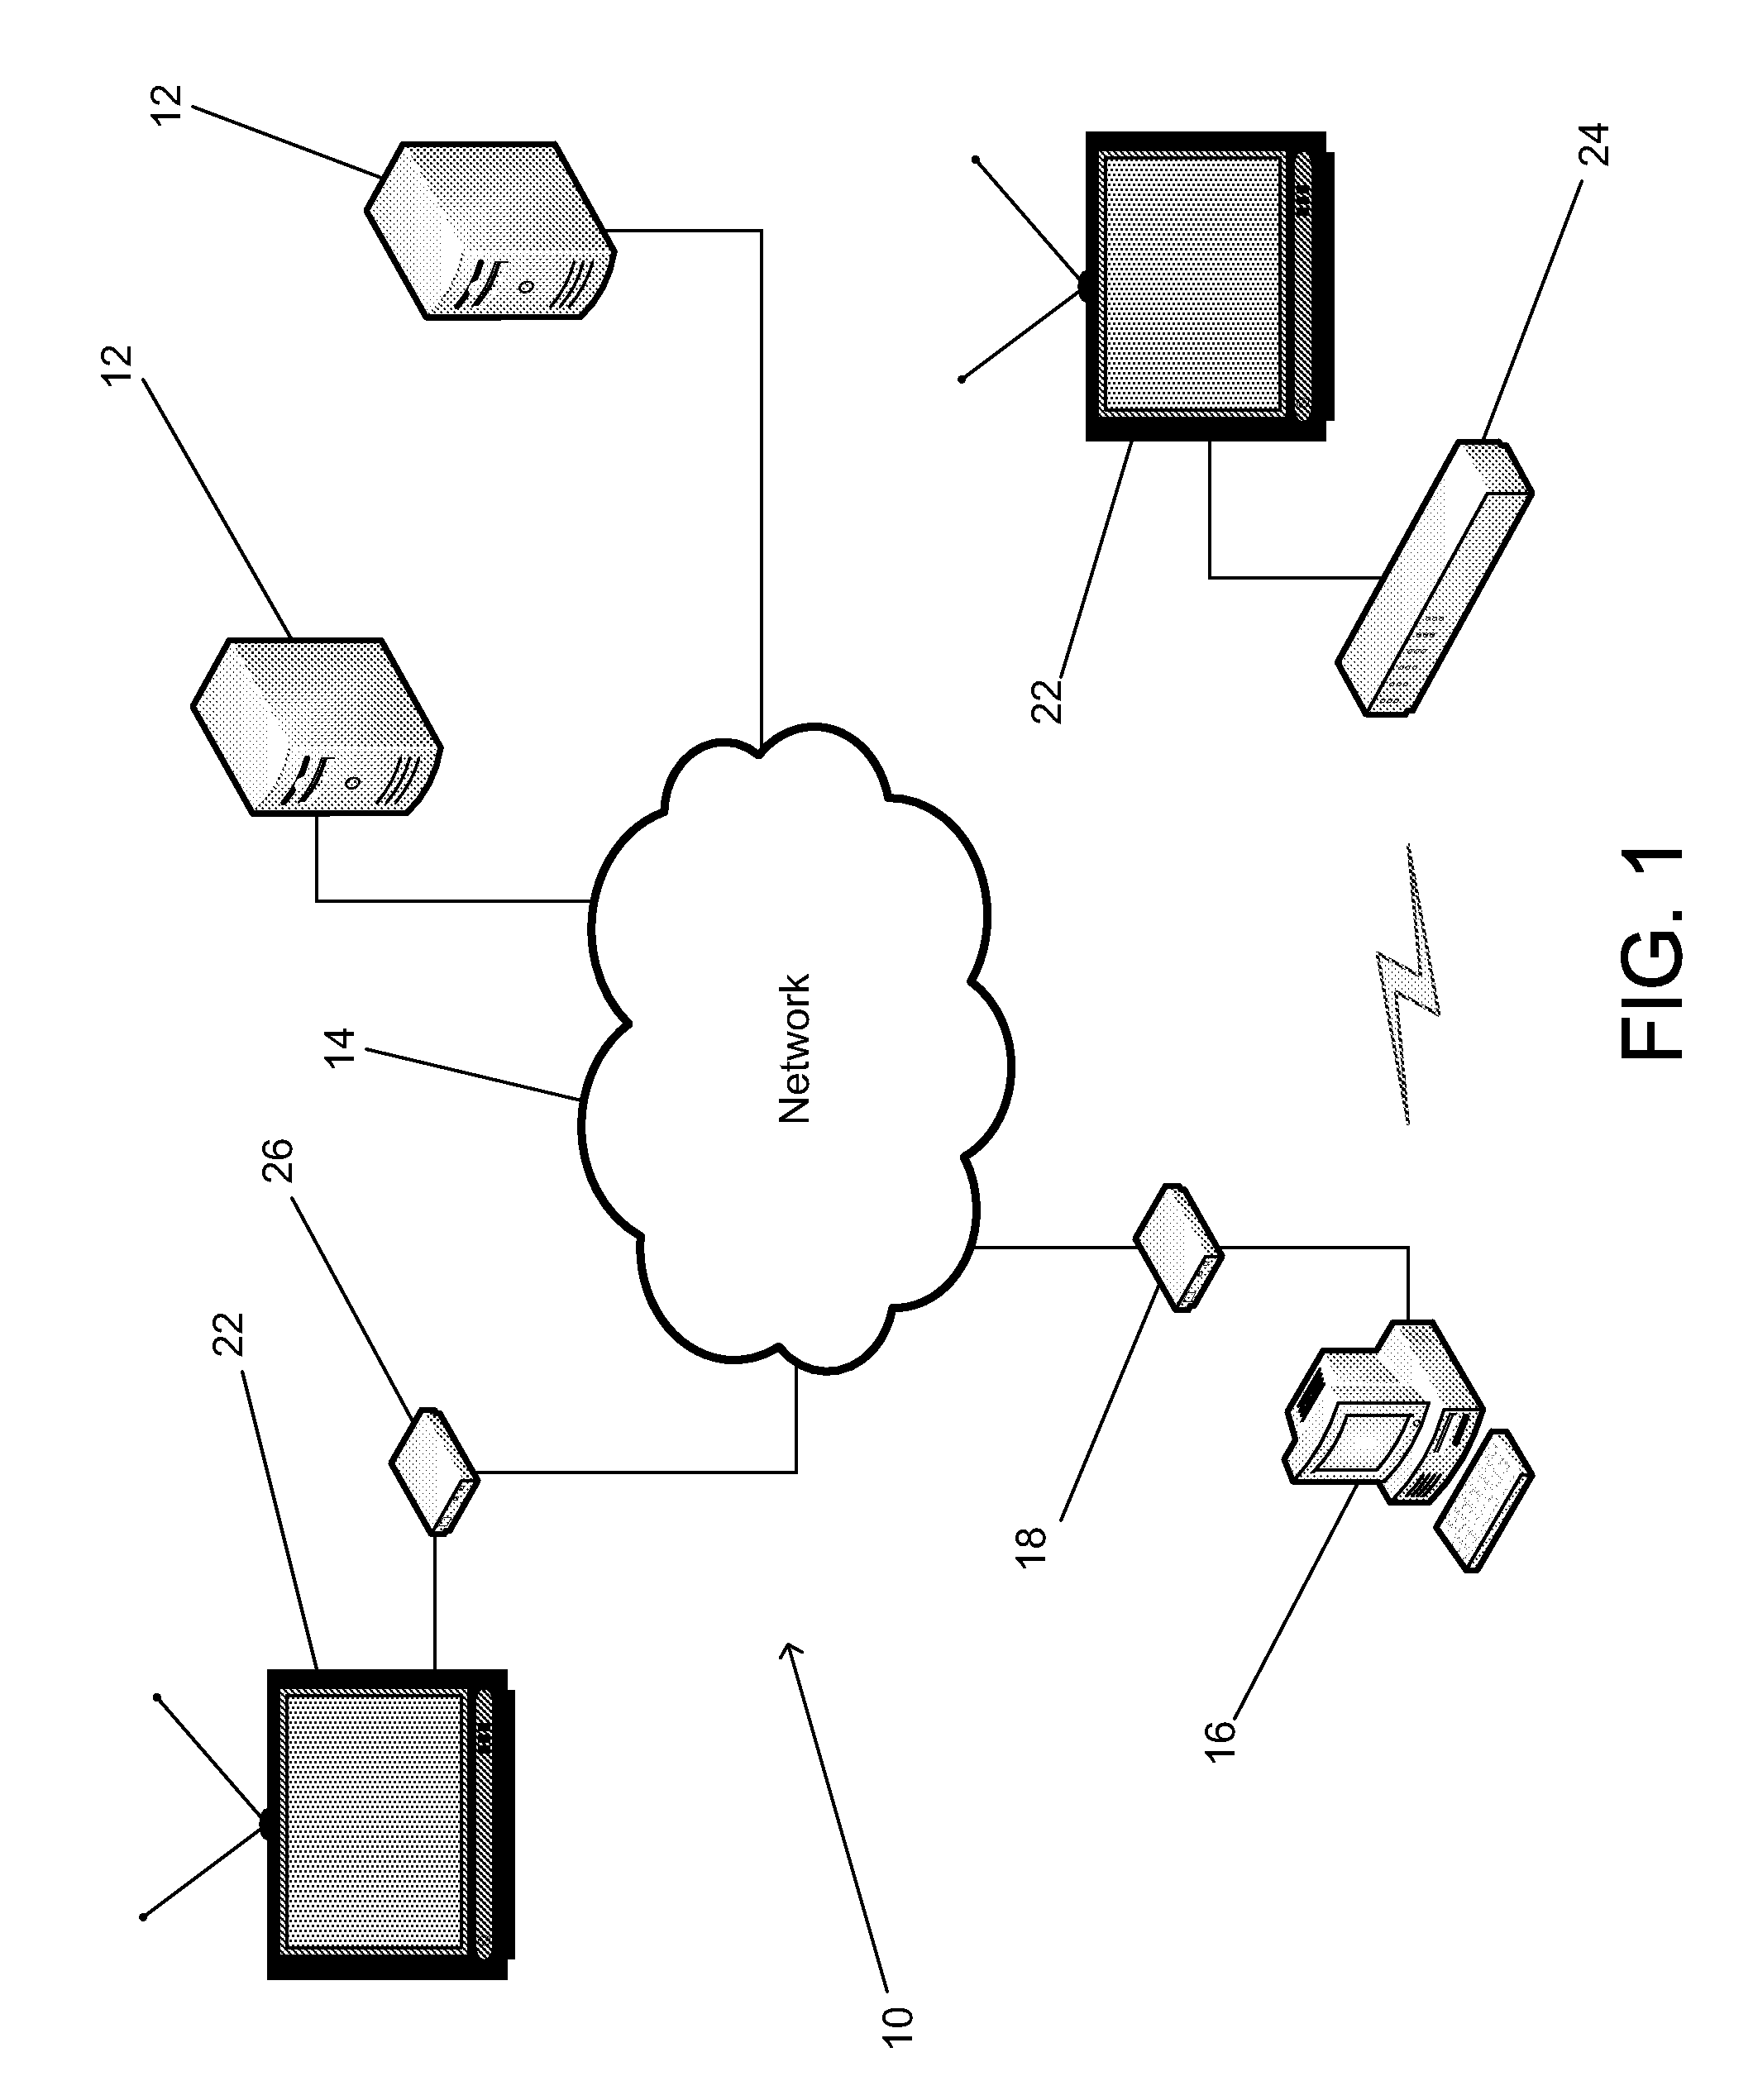 System and method for playing media obtained via the internet on a television